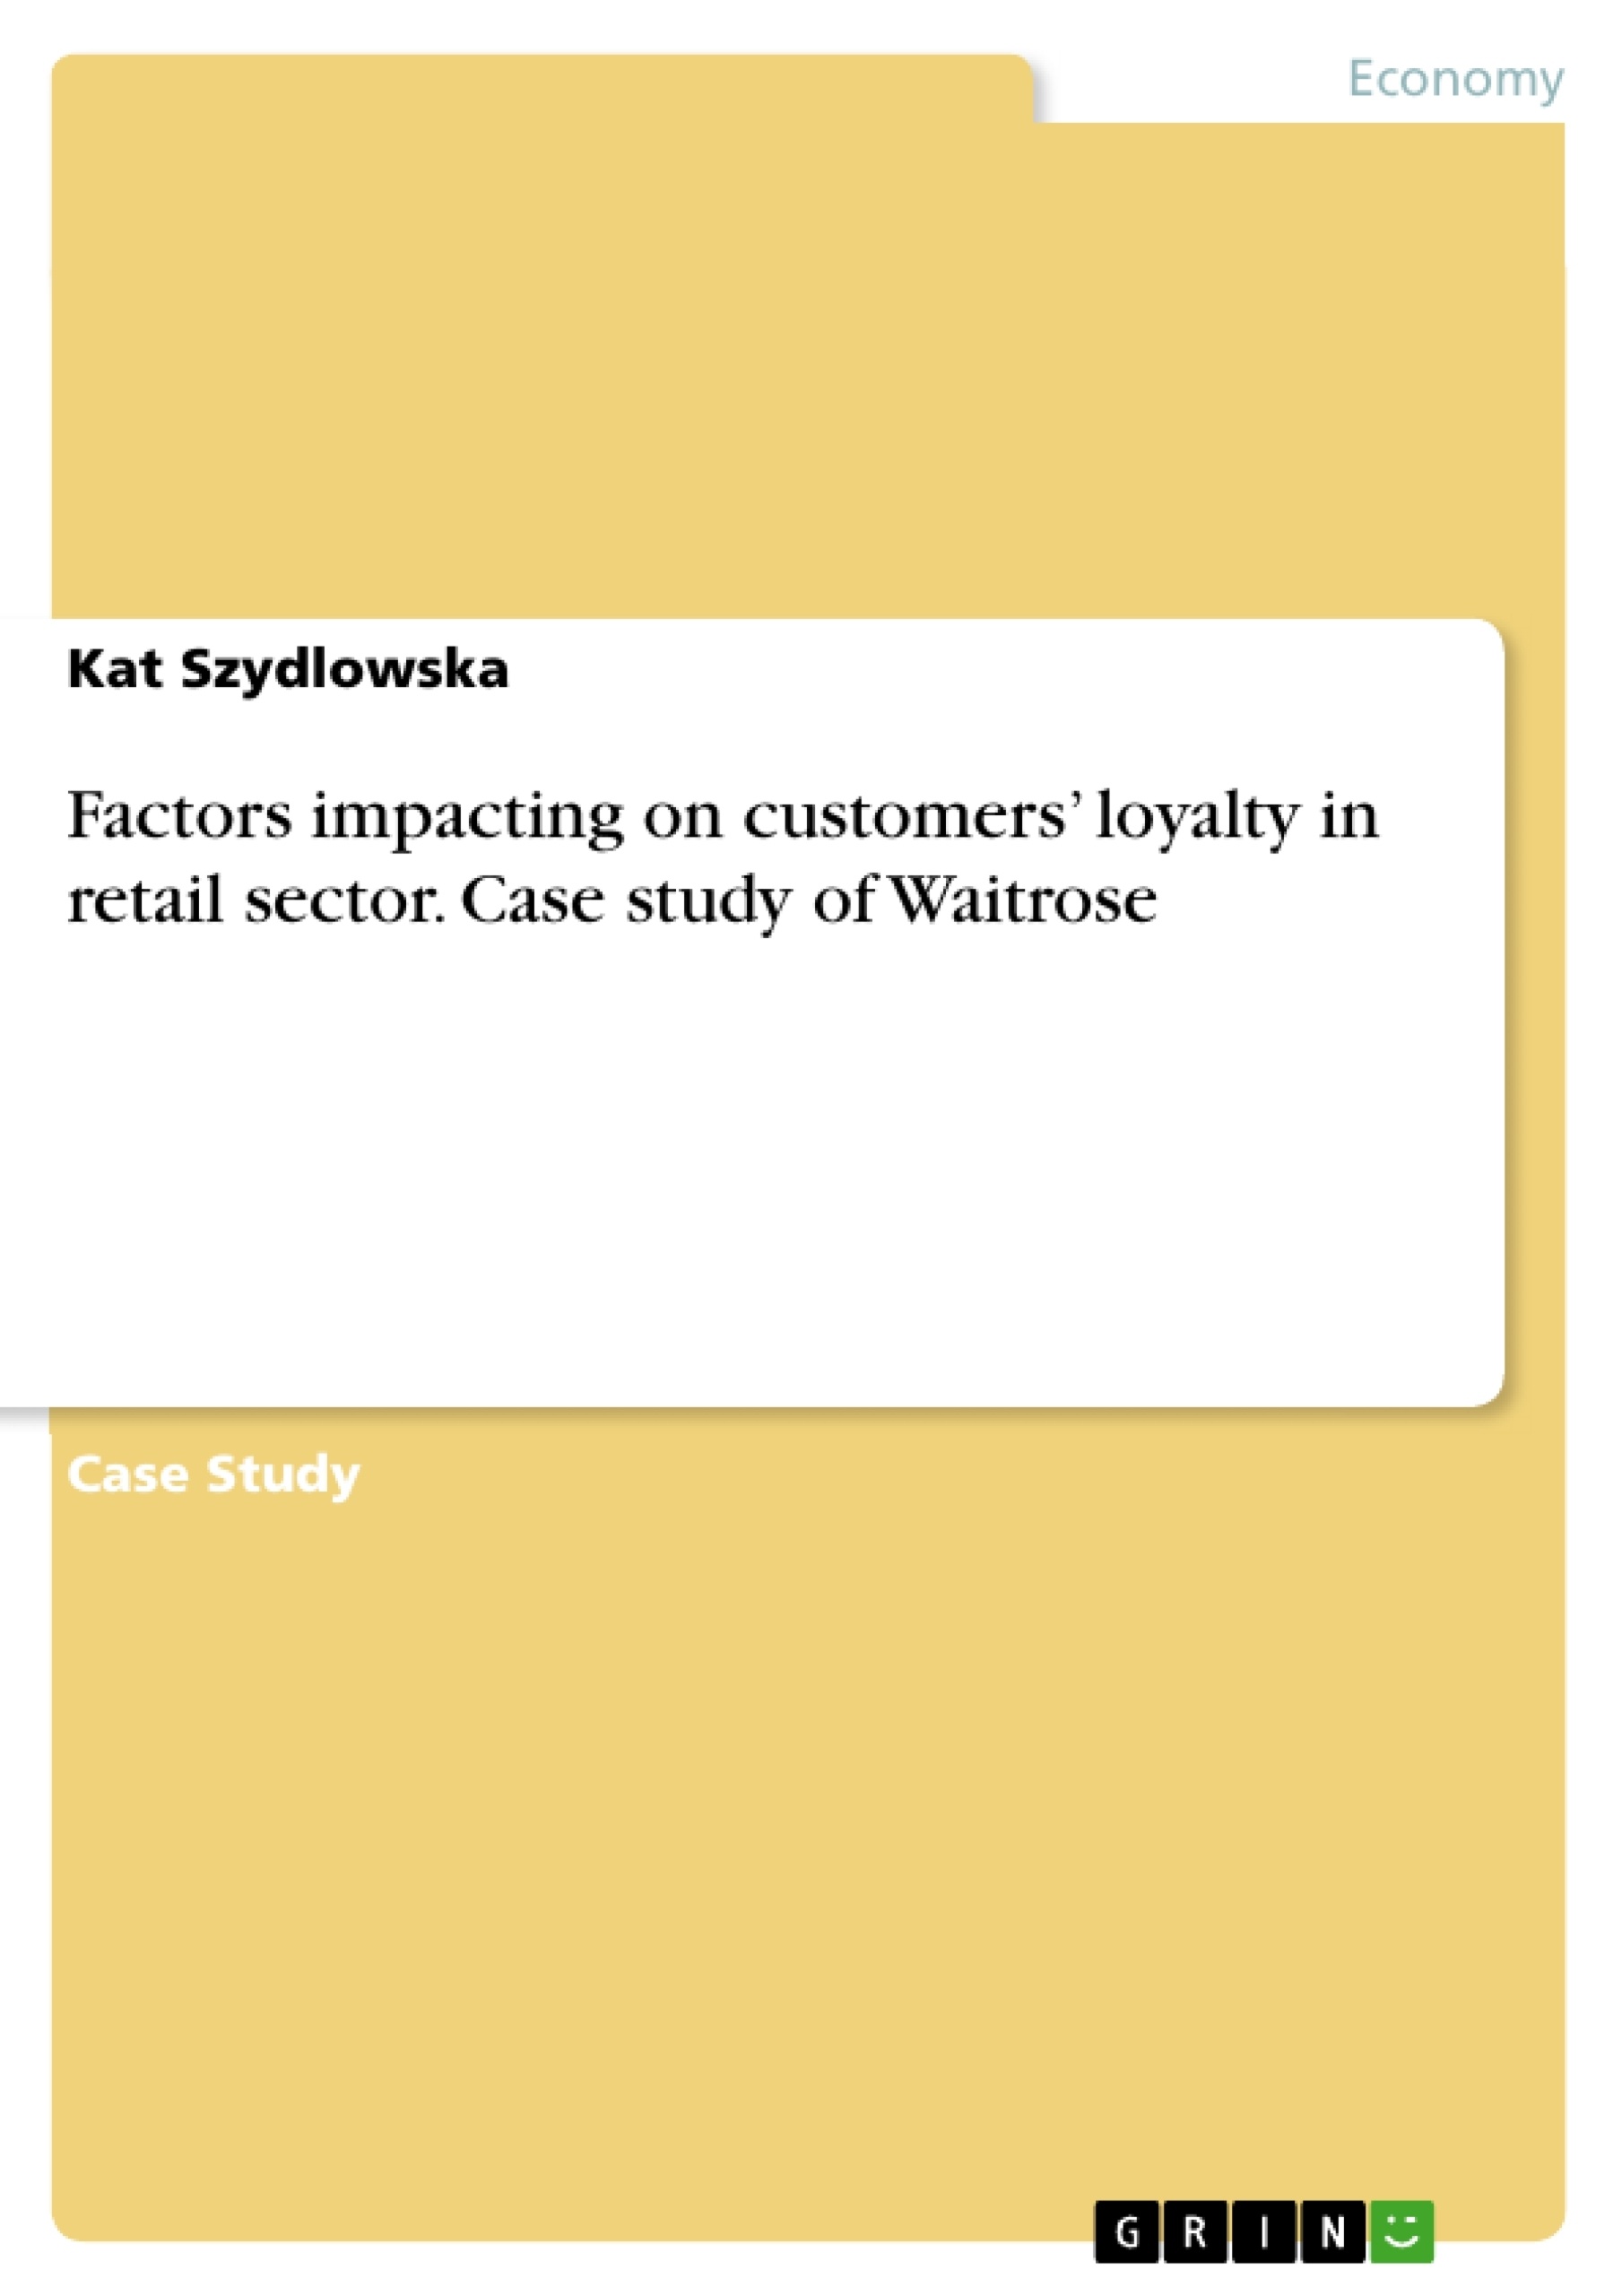 Titel: Factors impacting on customers’ loyalty in retail sector. Case study of Waitrose